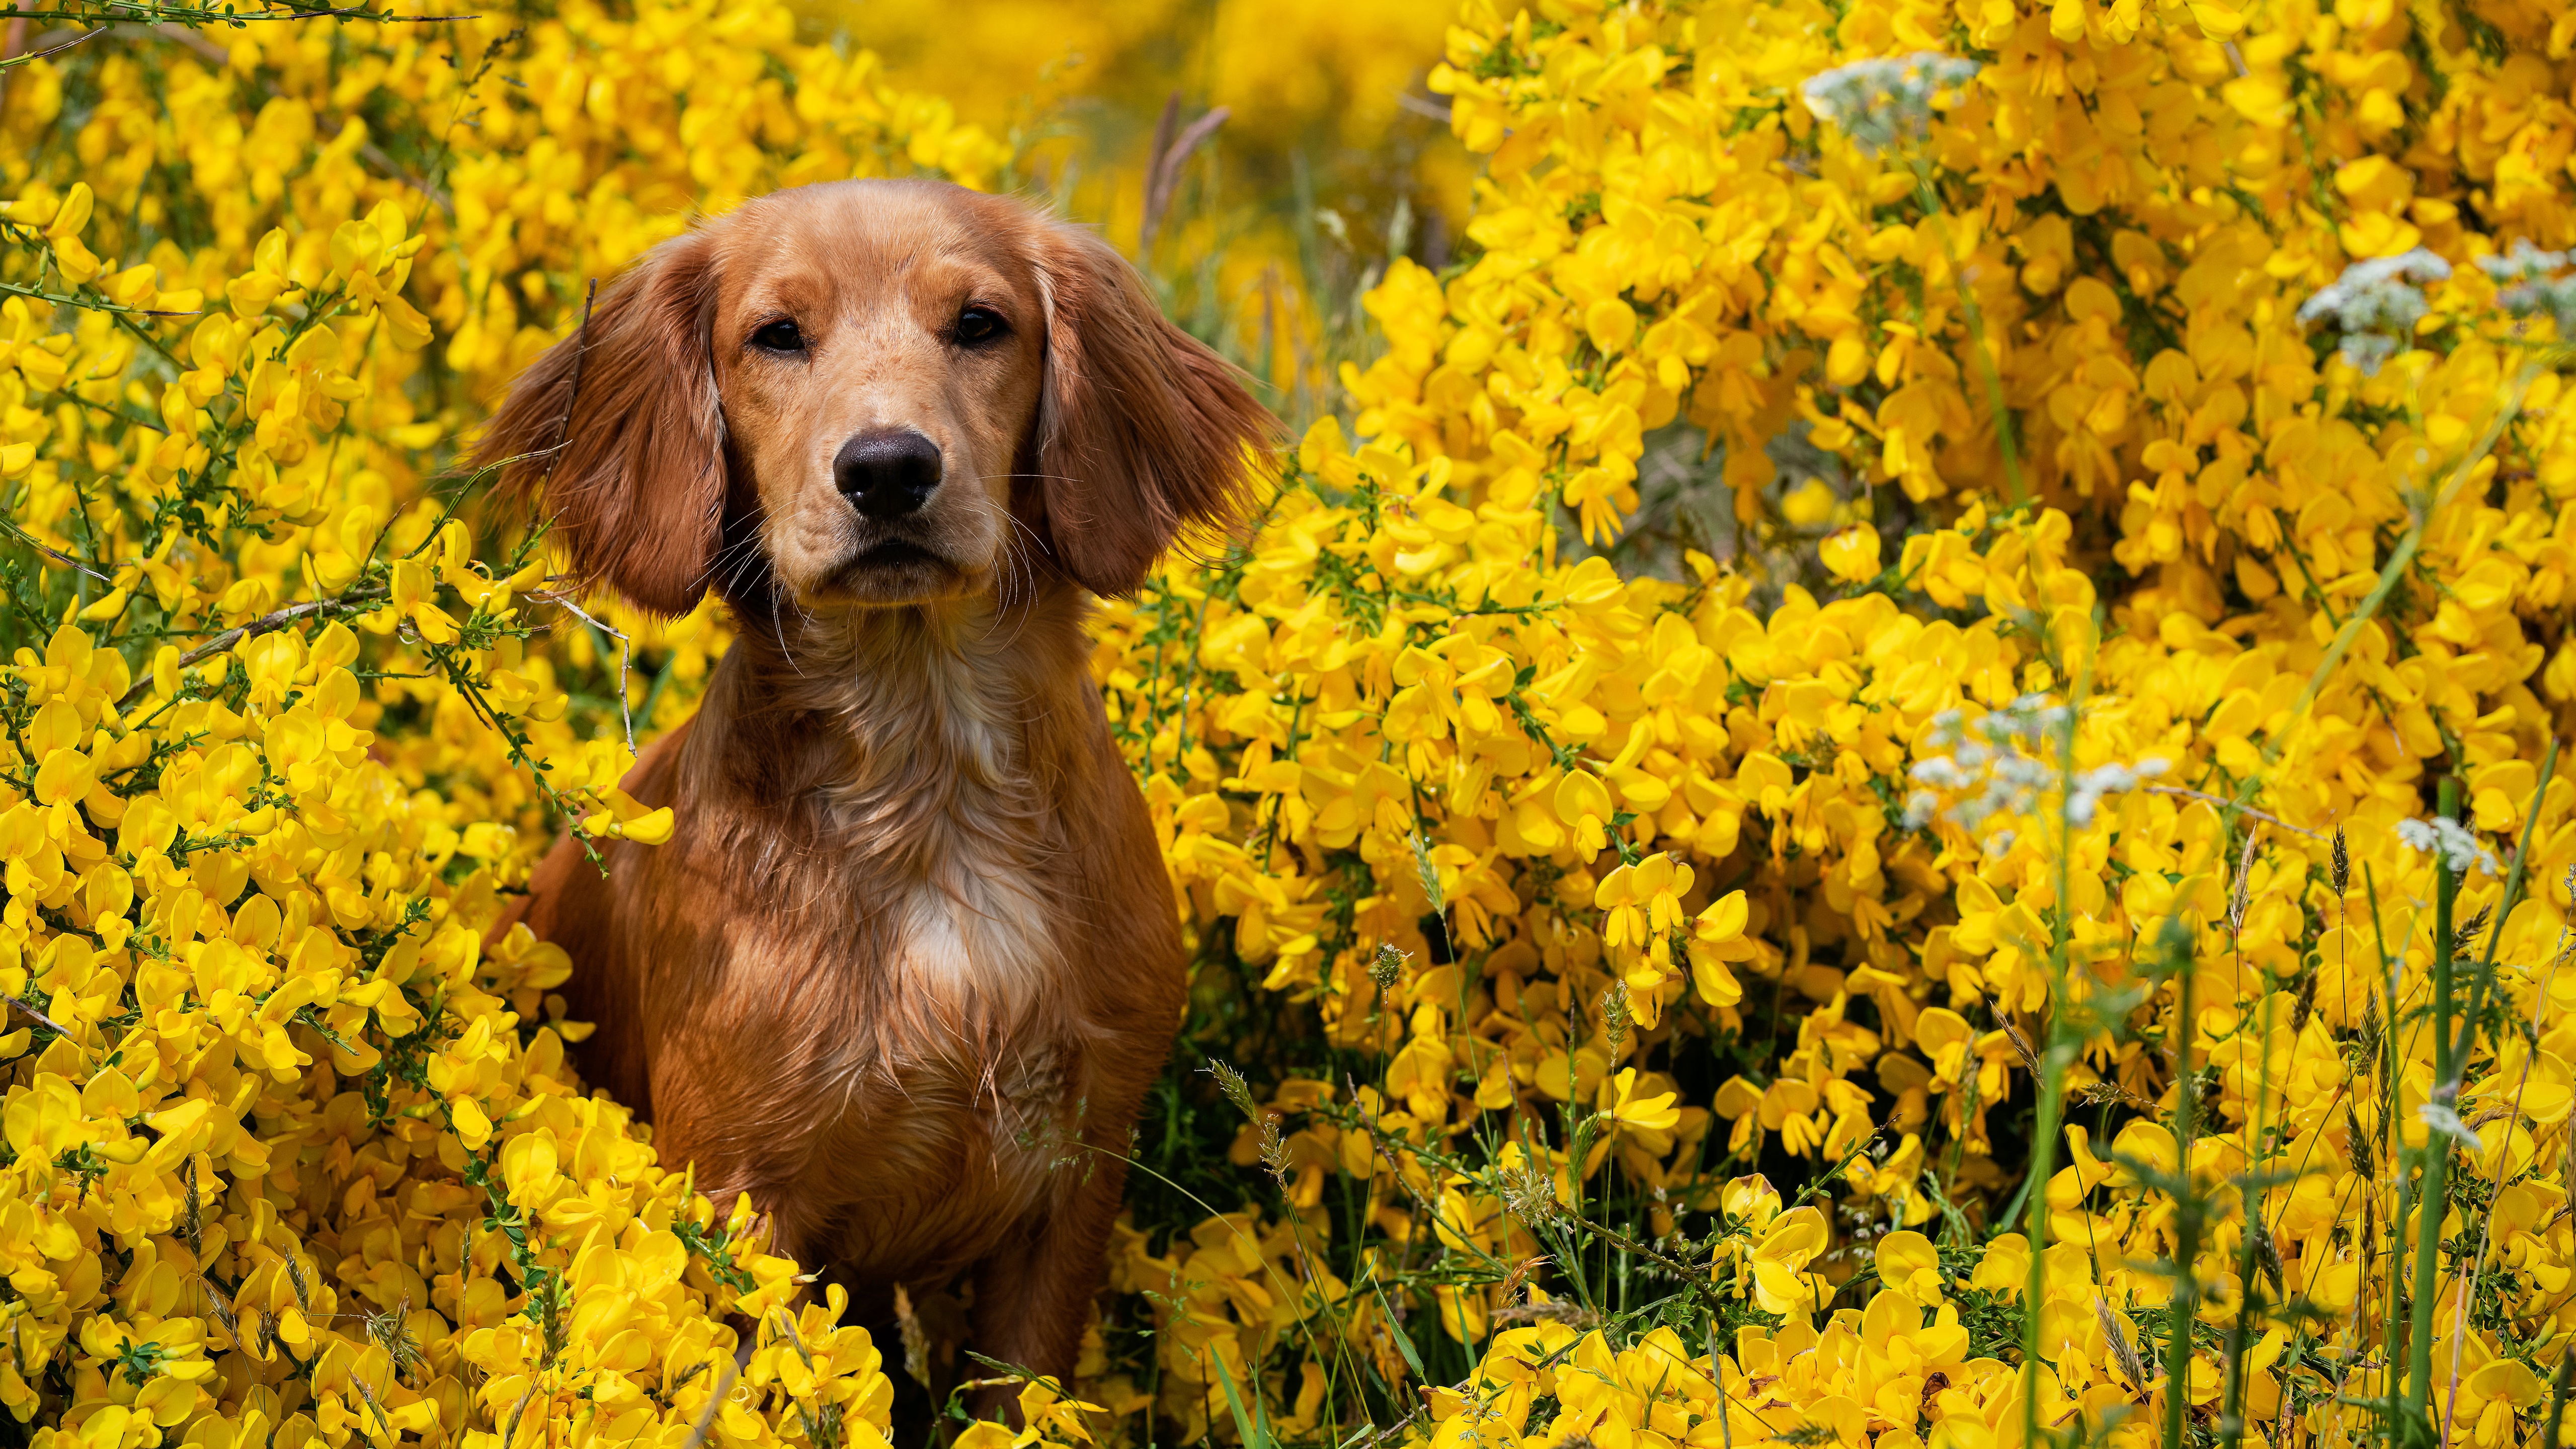 Wallpapers dog yellow flowers cute on the desktop